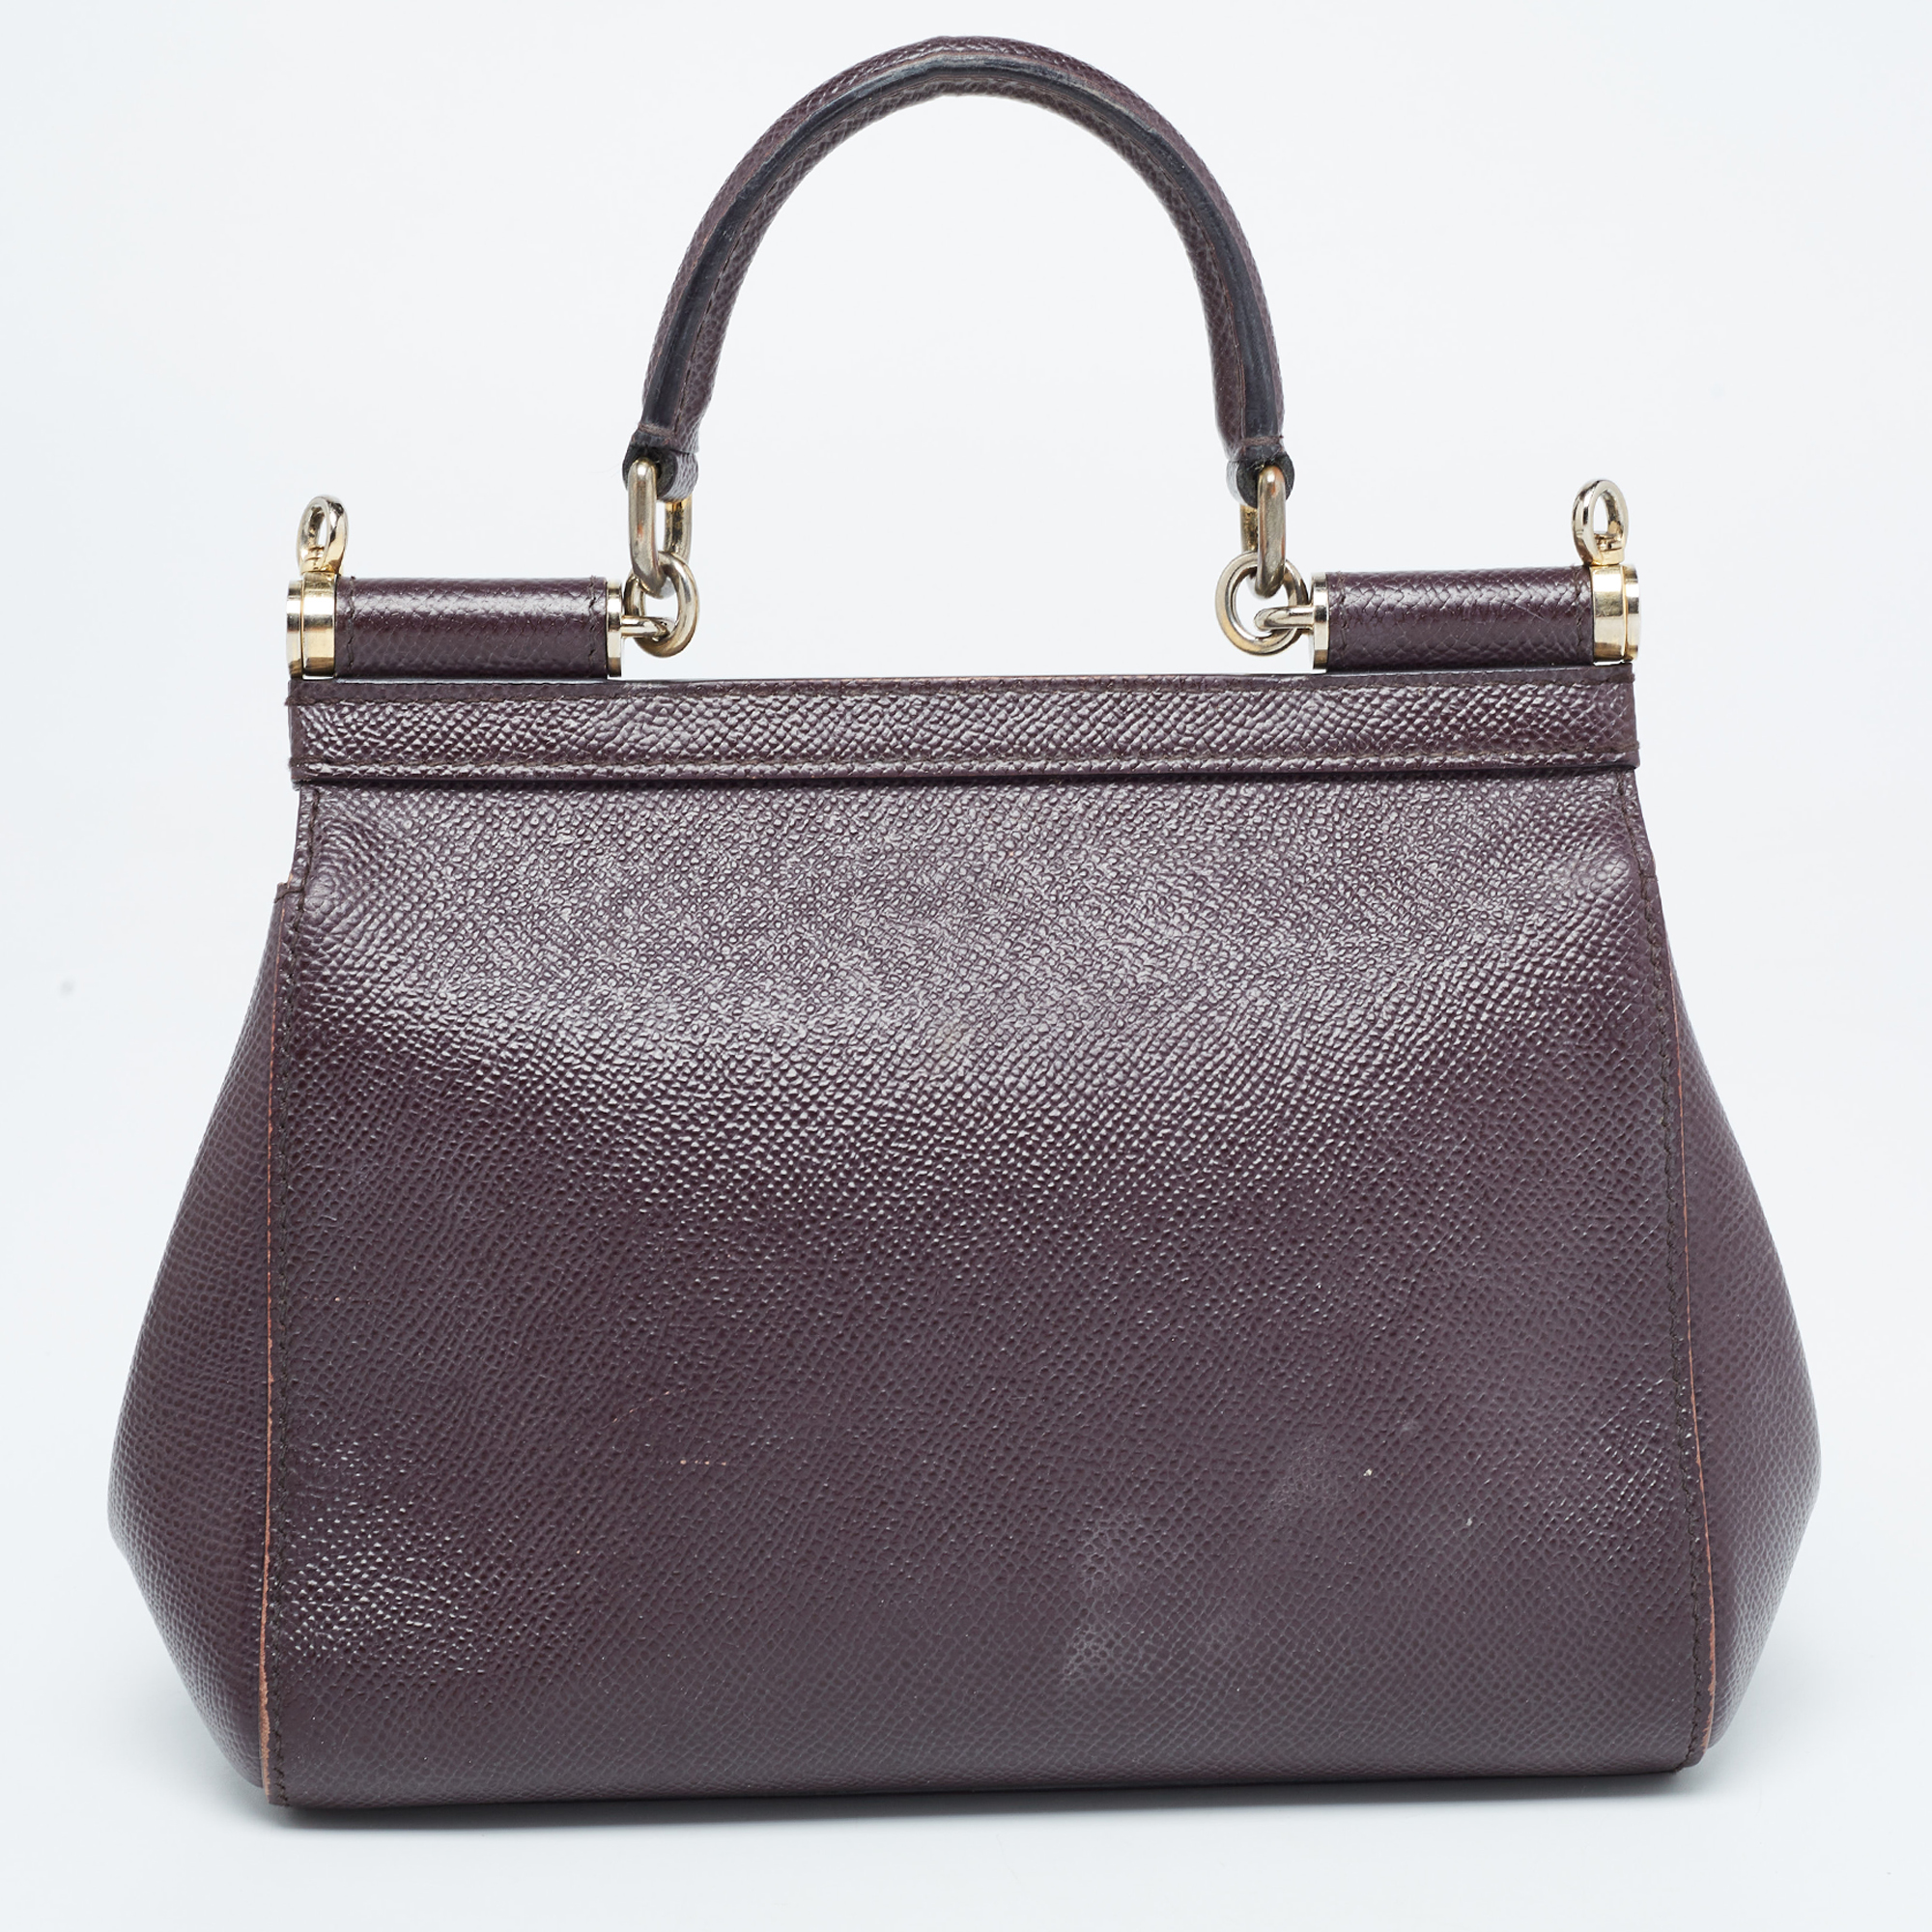 Dolce & Gabbana Burgundy Leather Small Miss Sicily Top Handle Bag